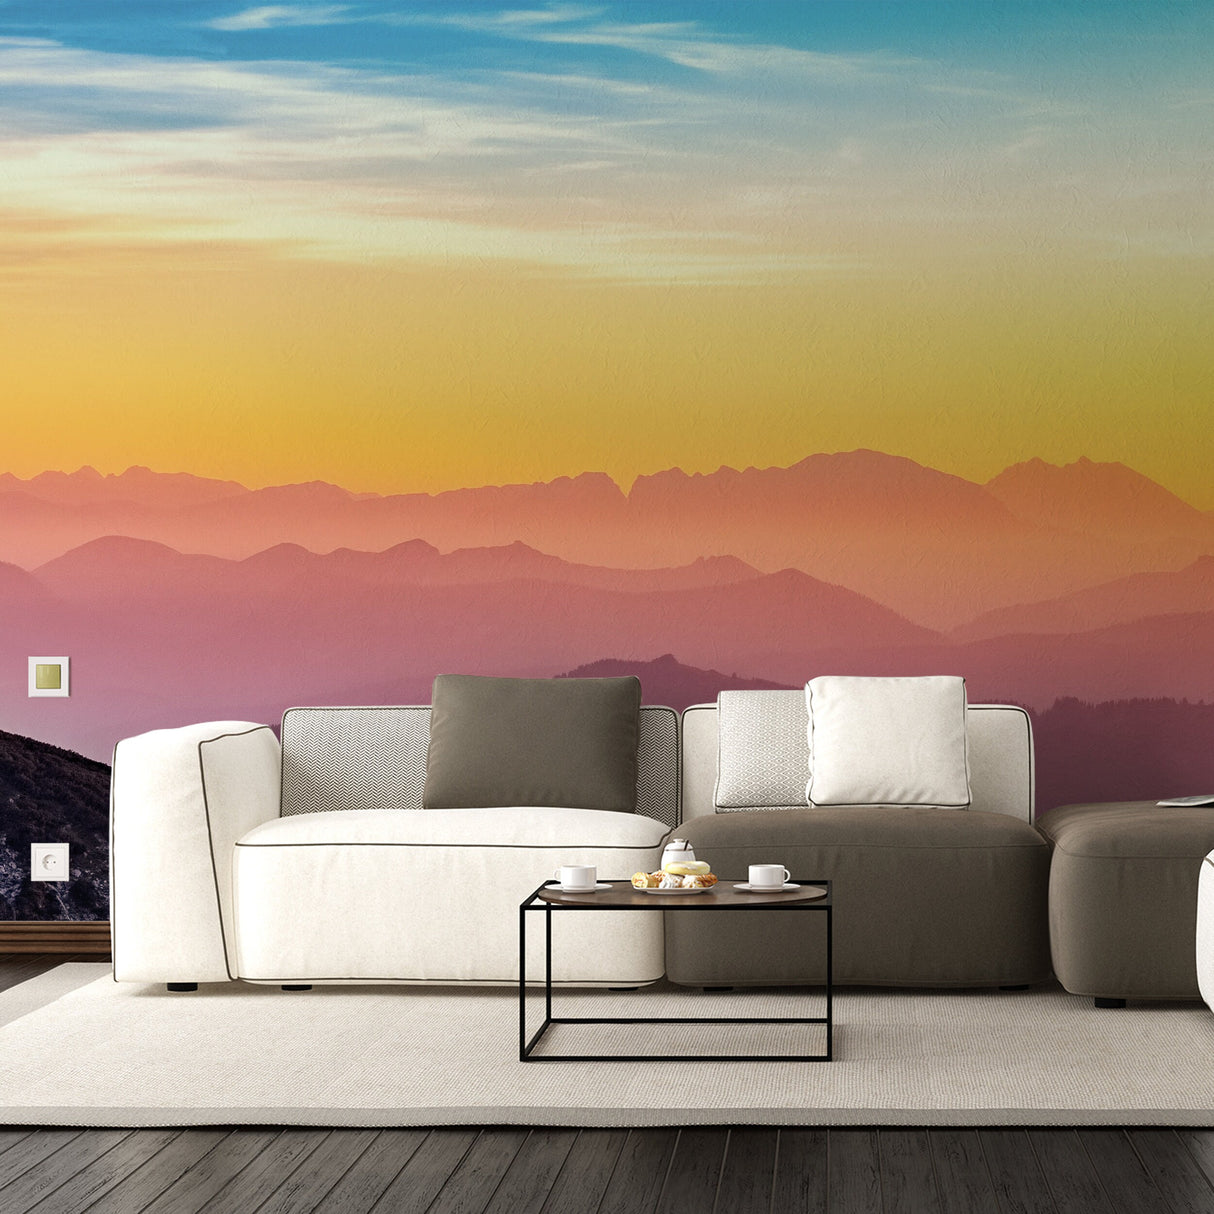 Sunset Wallpaper Decals - Peel Stick Nature Photo Self Adhesive Mural Wall Paper Decal